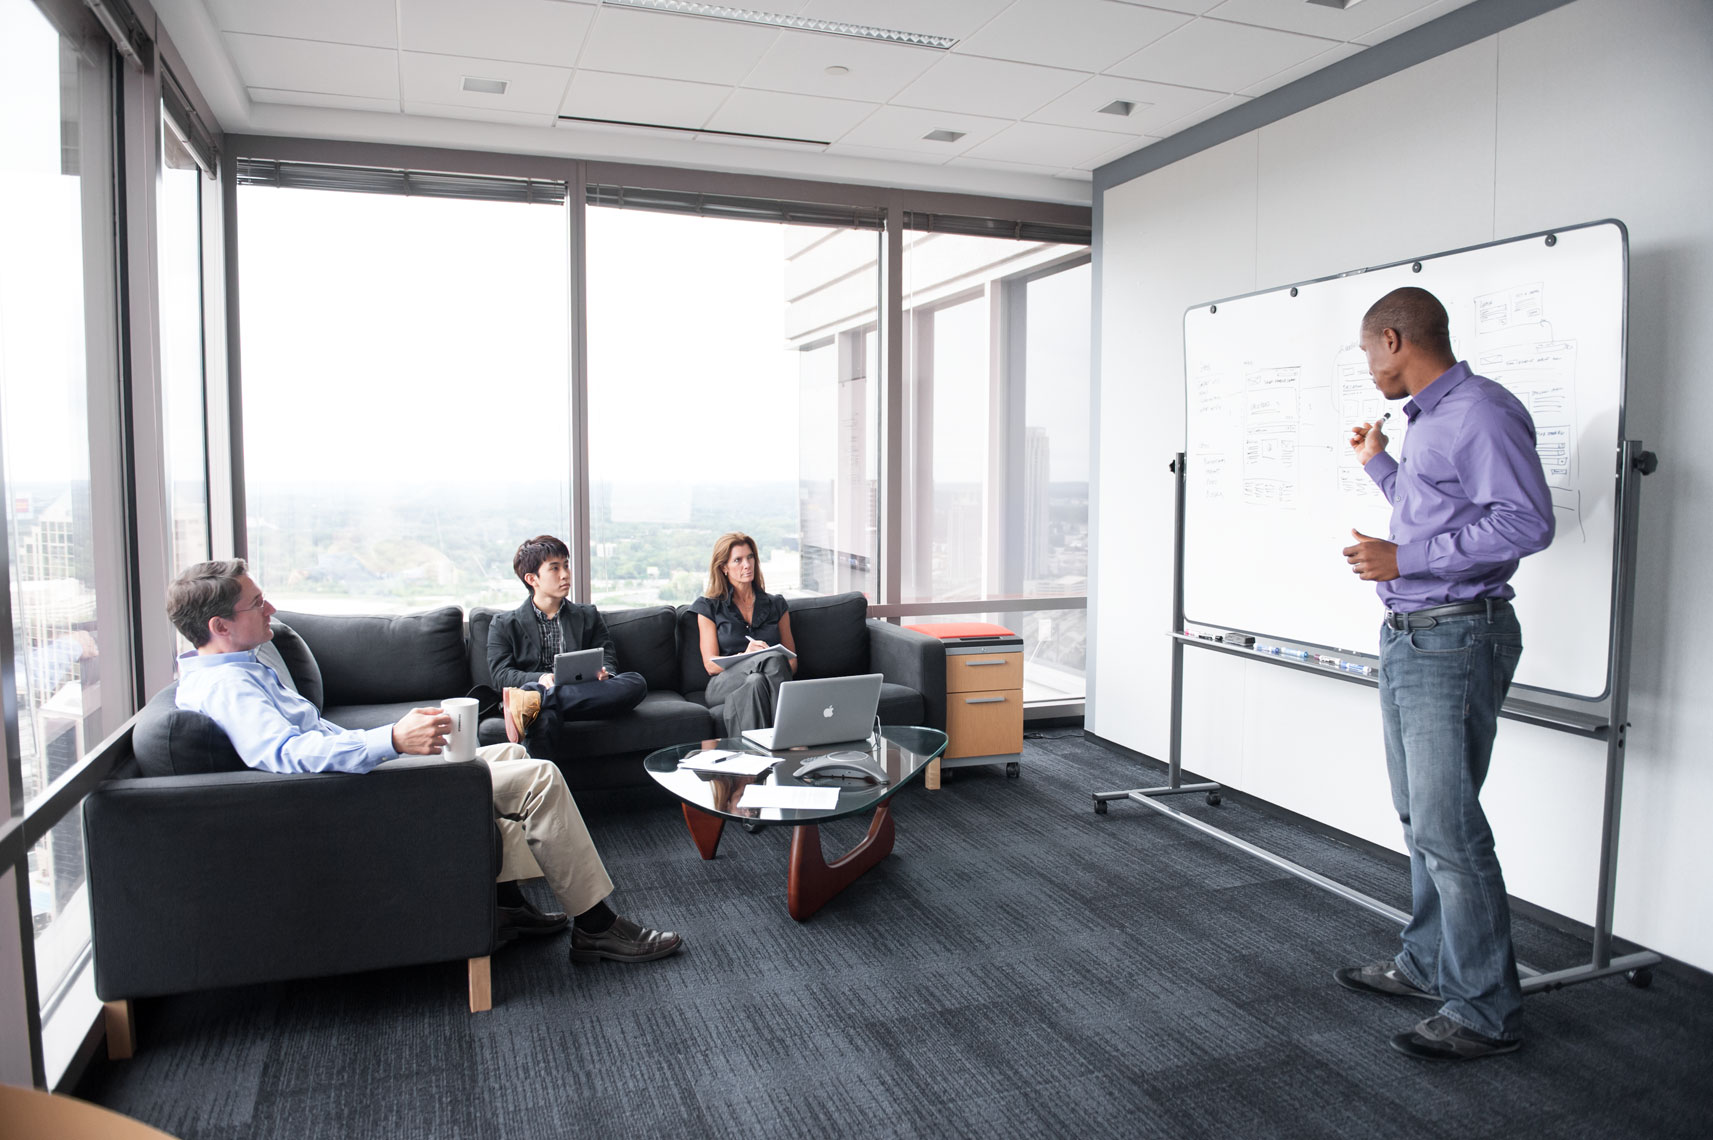 A man in a purple shirt standing at a whiteboard speaking to seated people in a high-rise office